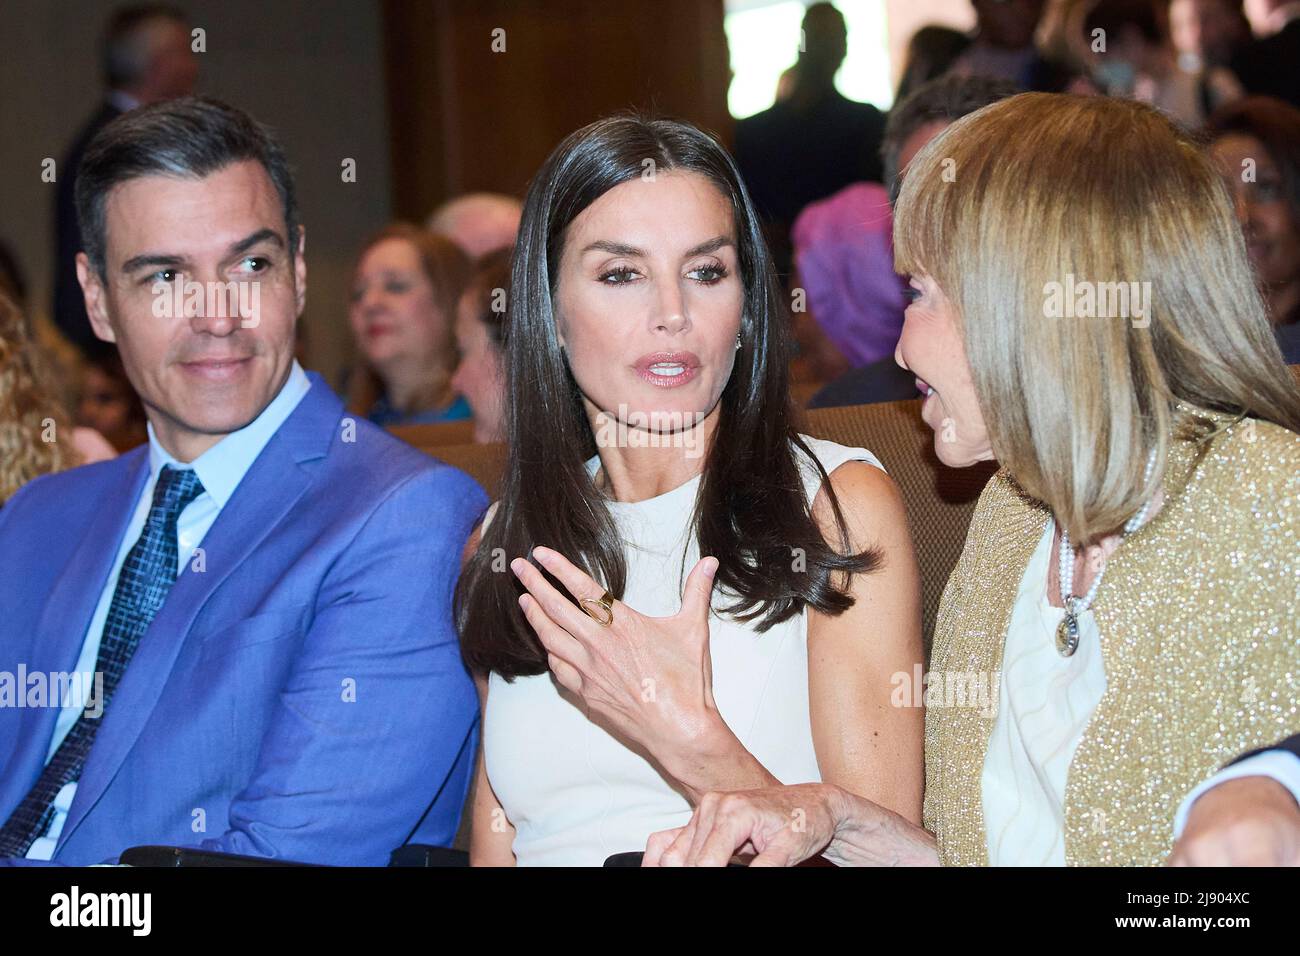 Madrid. Spain. 20220519,  Queen Letizia of Spain, Pedro Sanchez, Prime Minister, Maria Teresa Fernandez de la Vega attends  the International Conference ‘Women's Bridges. Proposals from the South for global change’ at UNED Humanities Building on May 19, 2022 in Madrid, Spain Credit: MPG/Alamy Live News Stock Photo